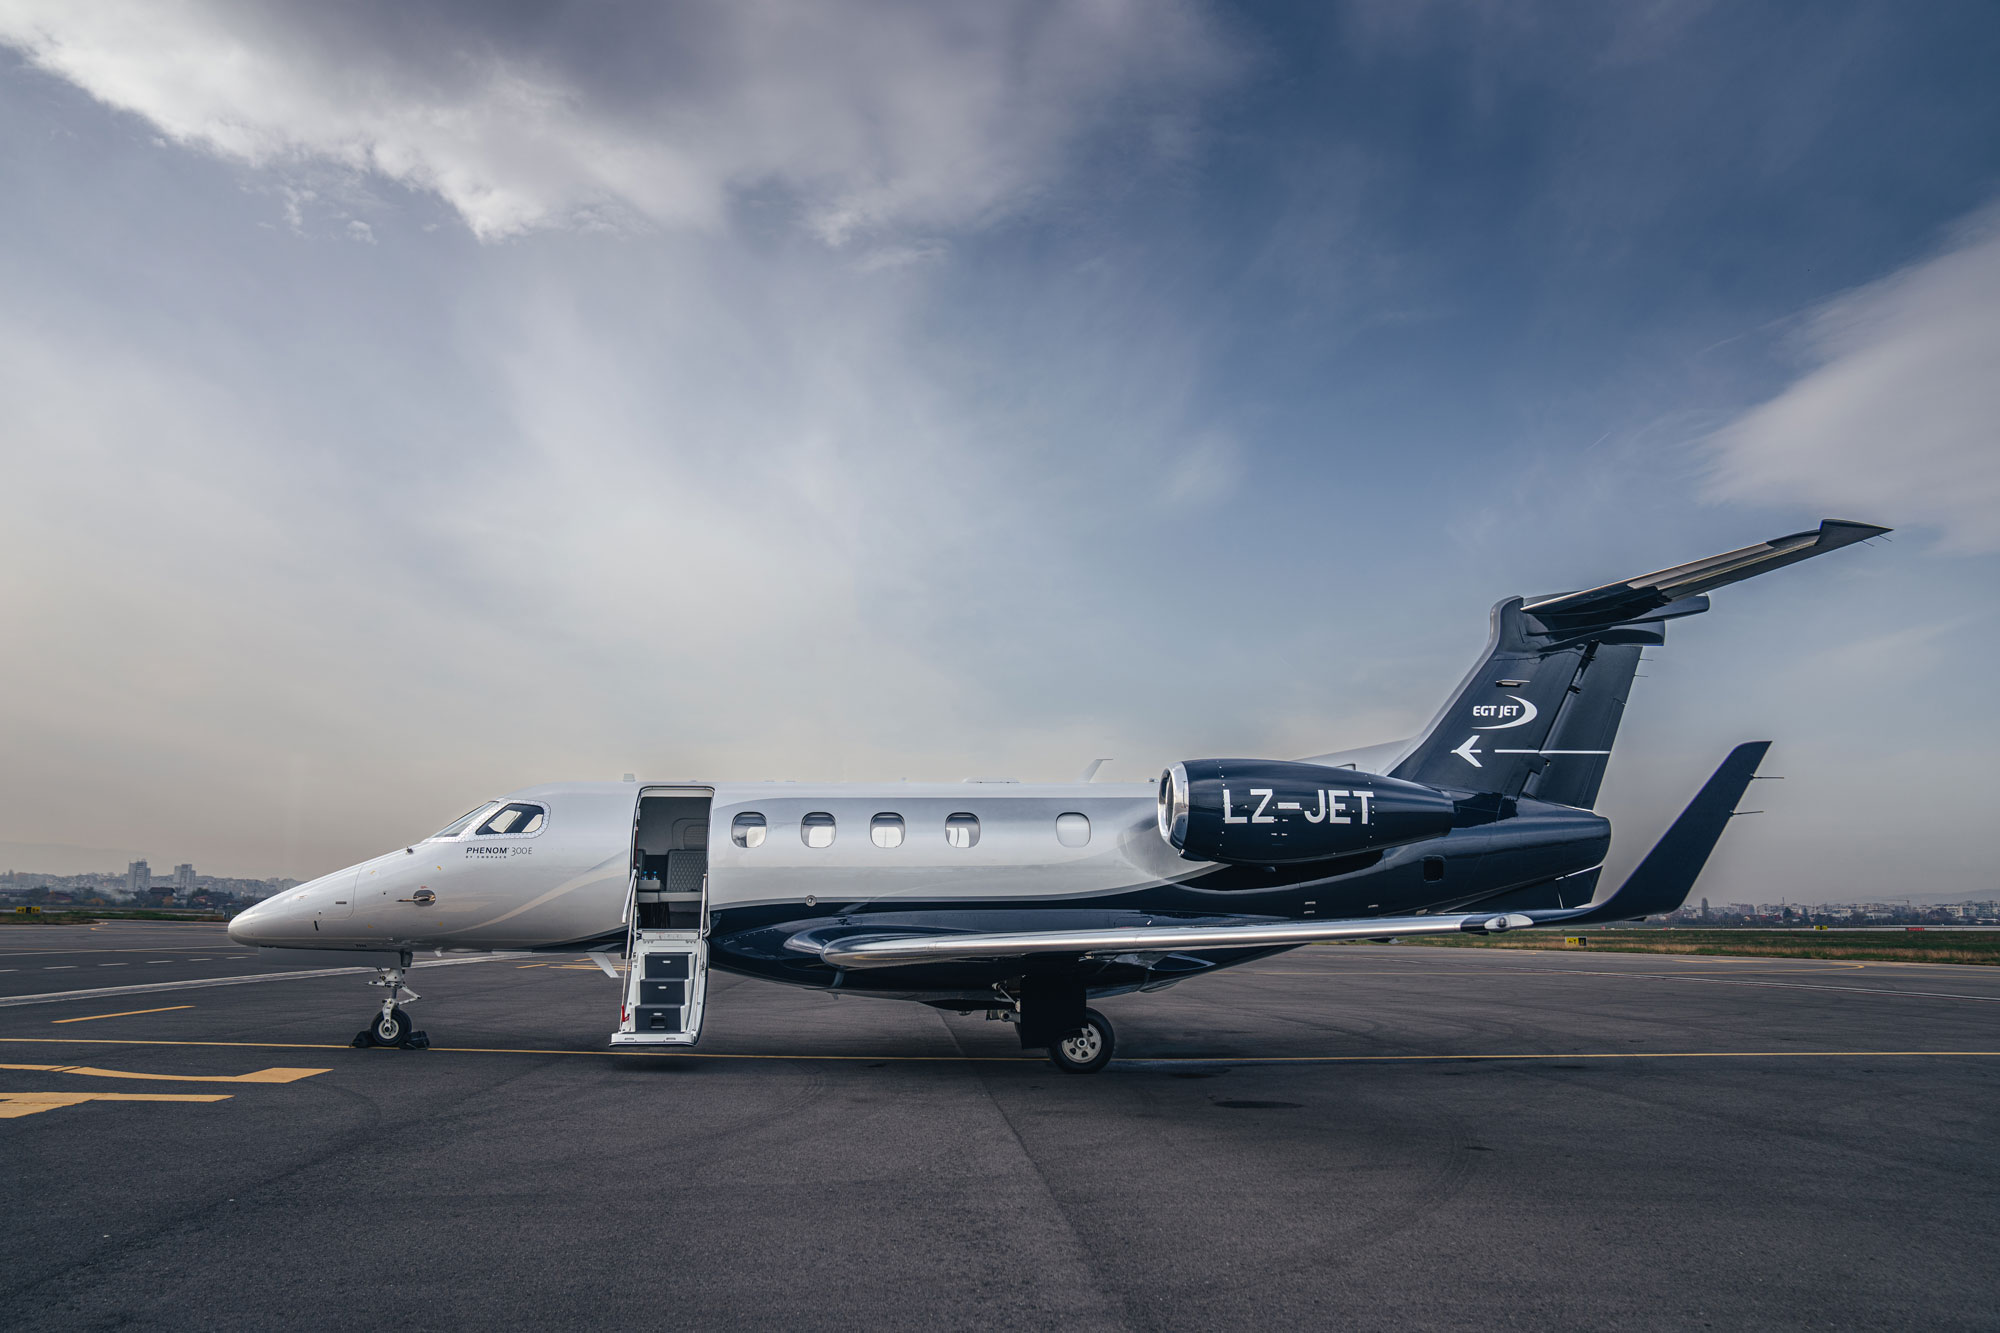 Aero-Dienst GmbH expands its maintenance portfolio to include line maintenance services for Embraer Phenom 300 aircraft